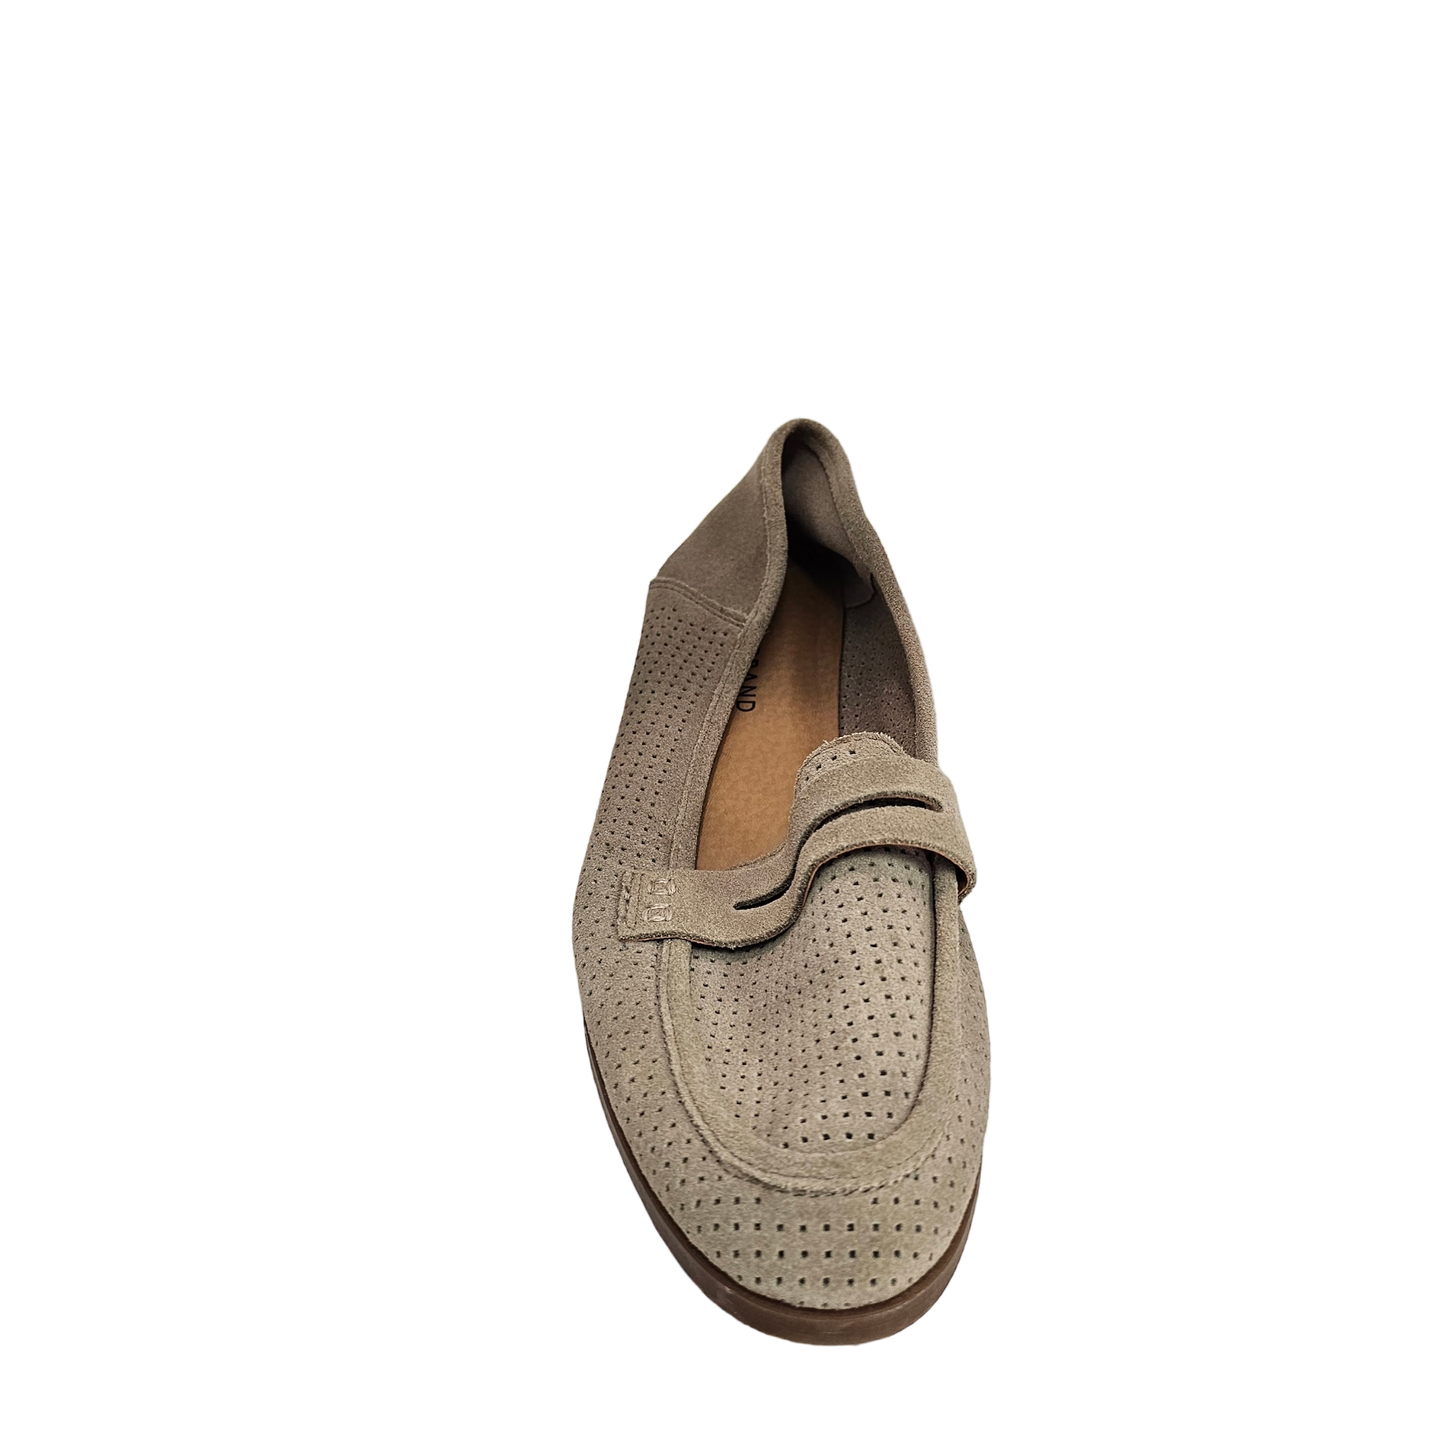 Shoes Flats Loafer Oxford By Lucky Brand  Size: 8.5